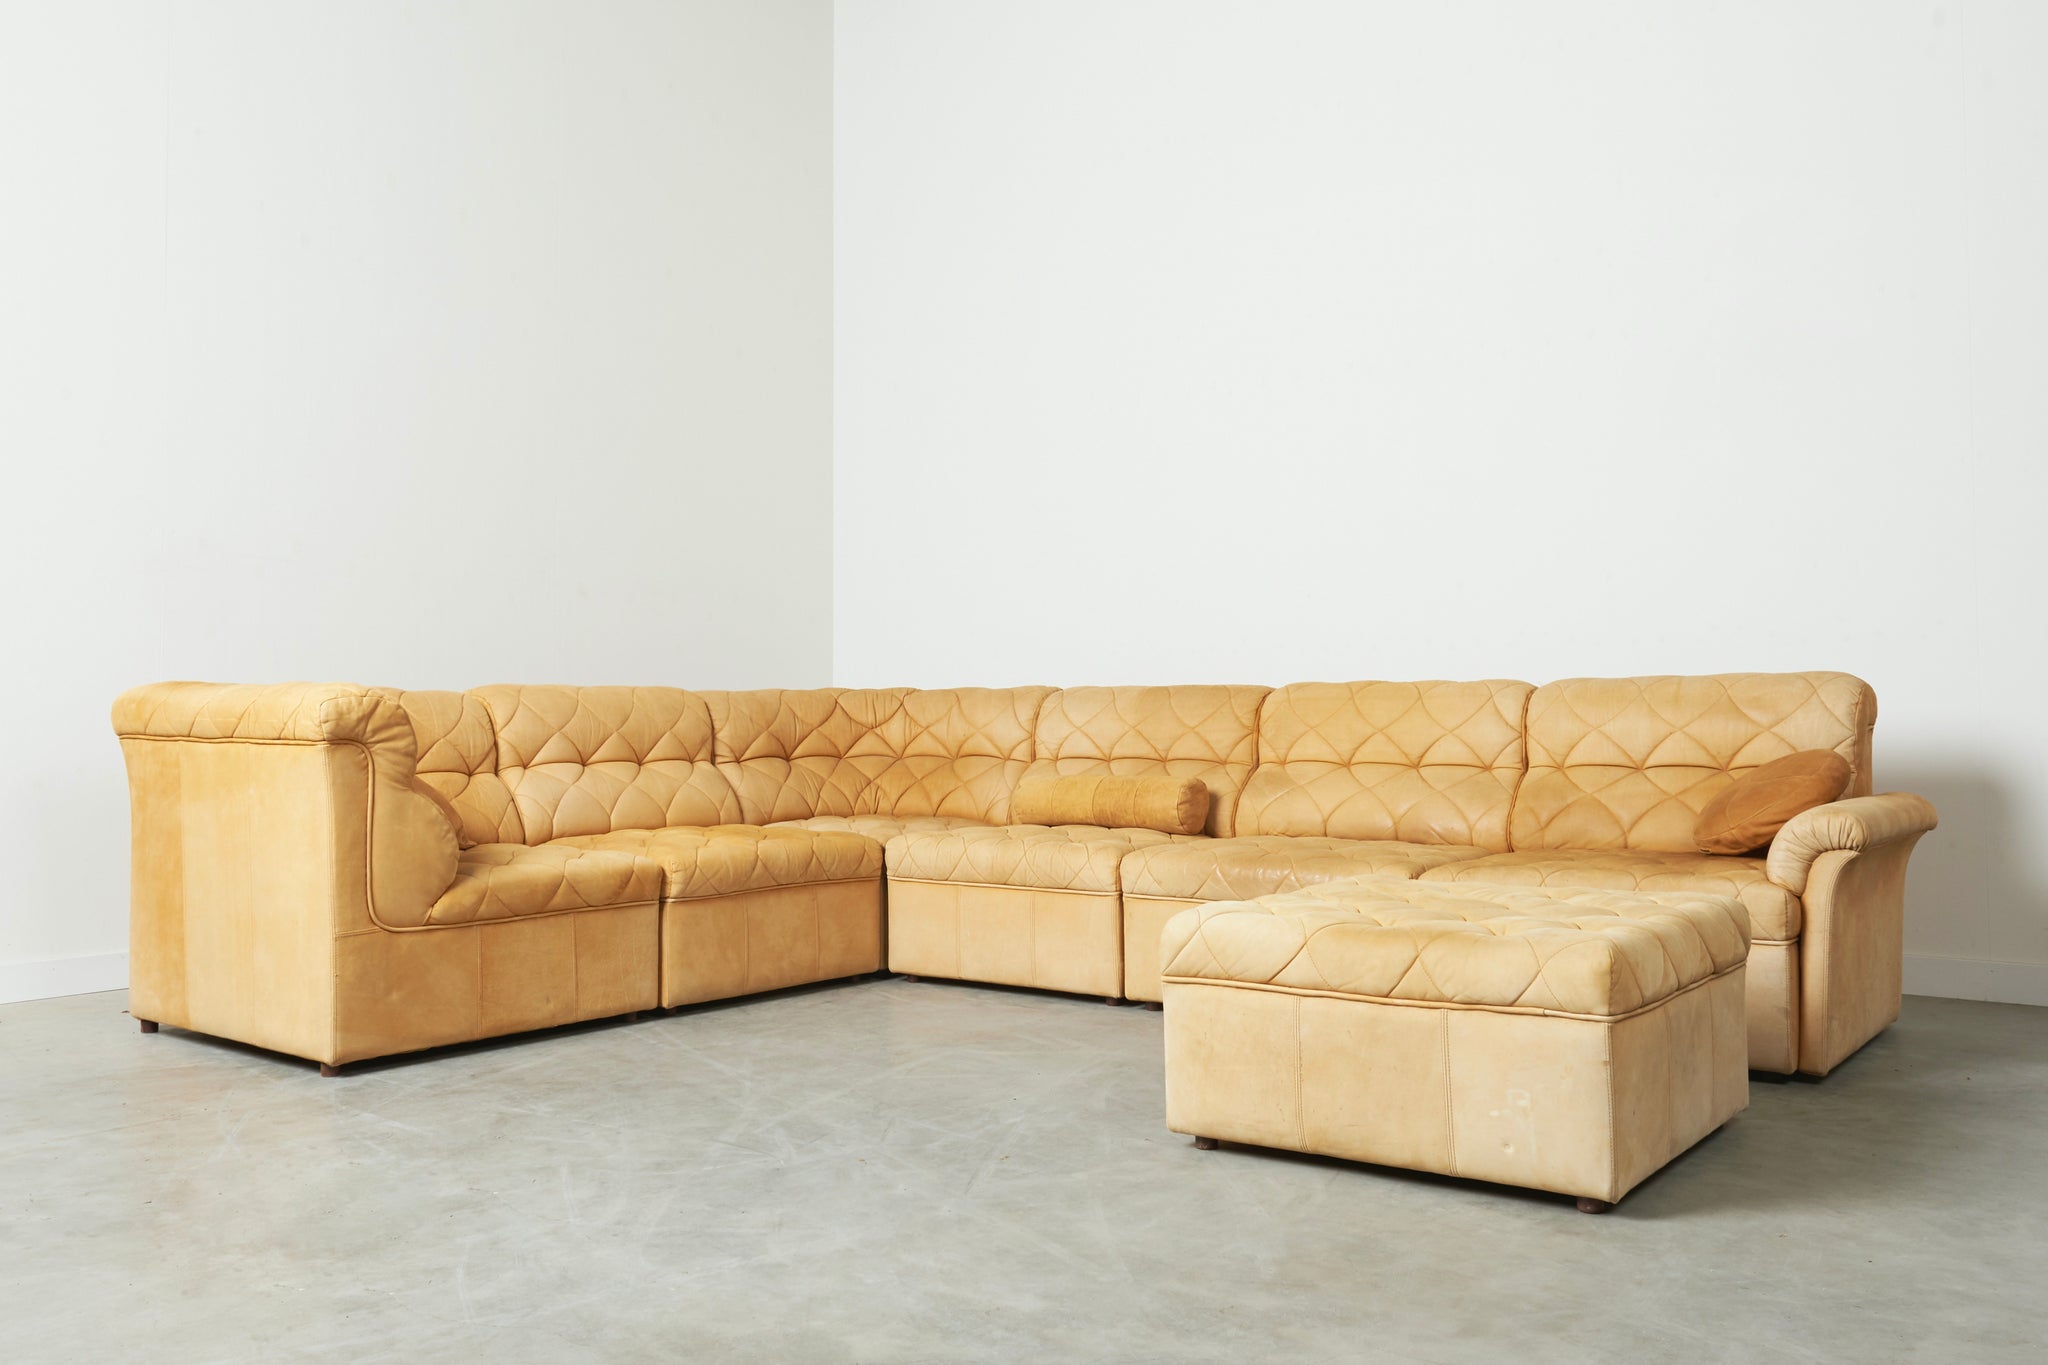 Modular leather sofa by Laauser, 1970s